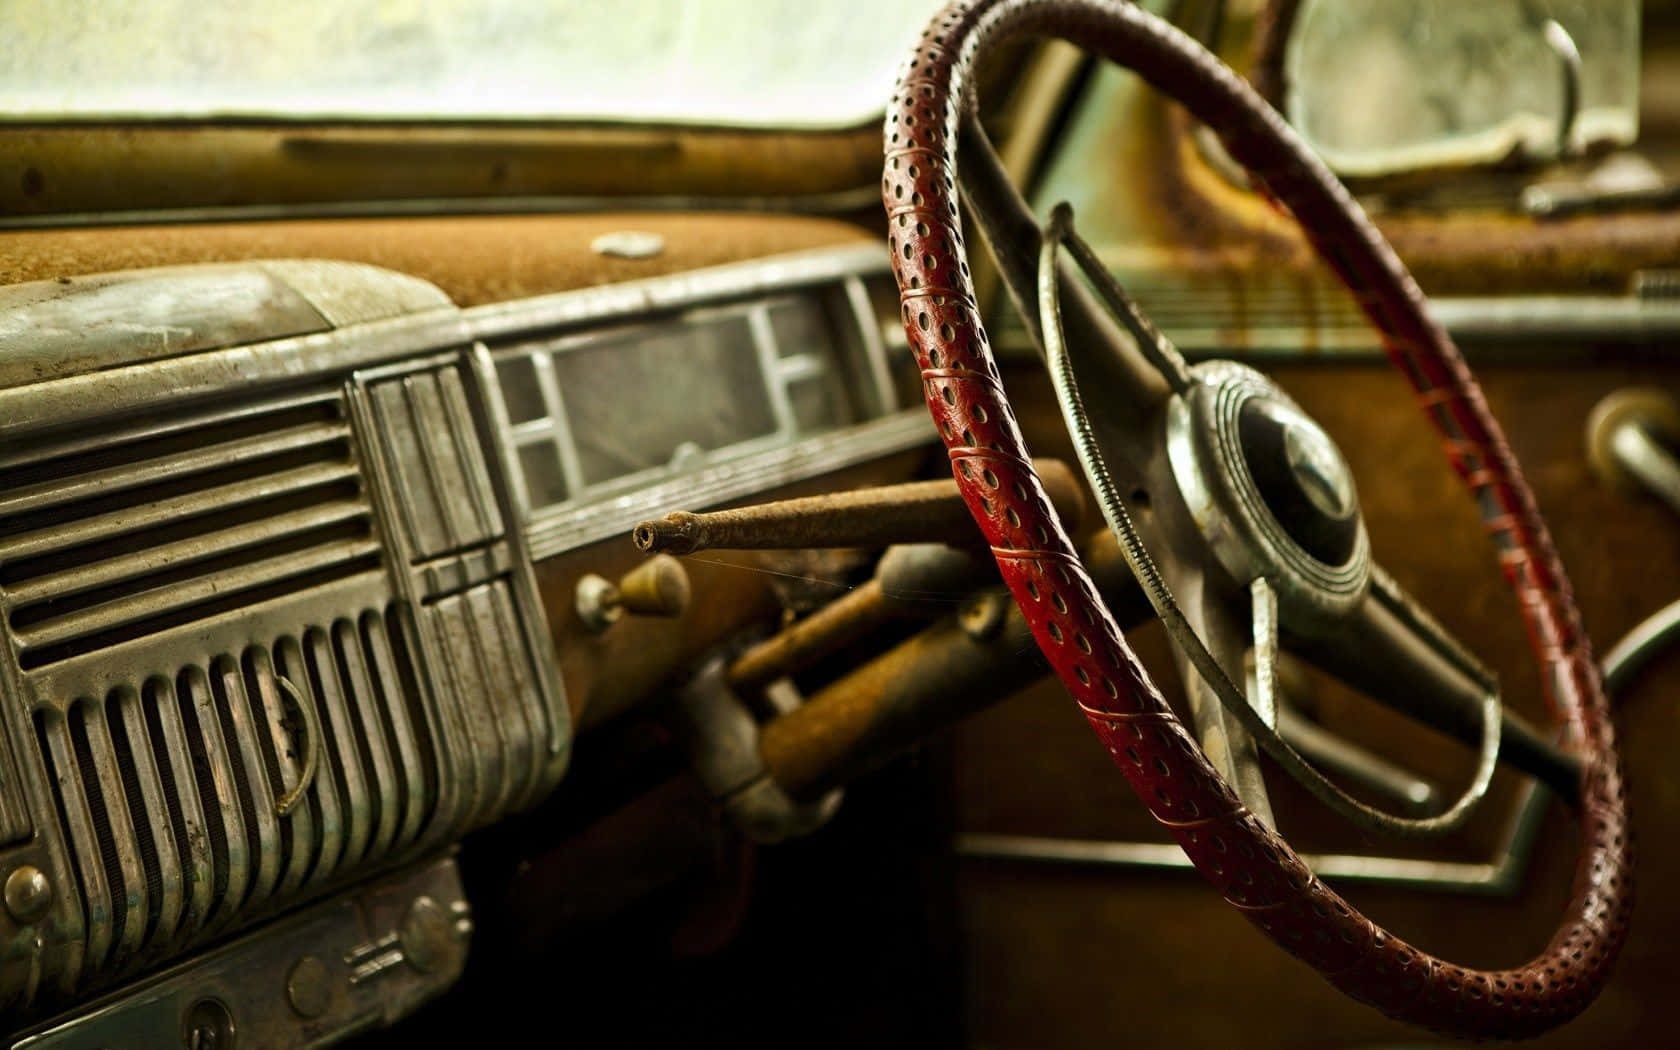 An Old Car With A Steering Wheel And Steering Wheel